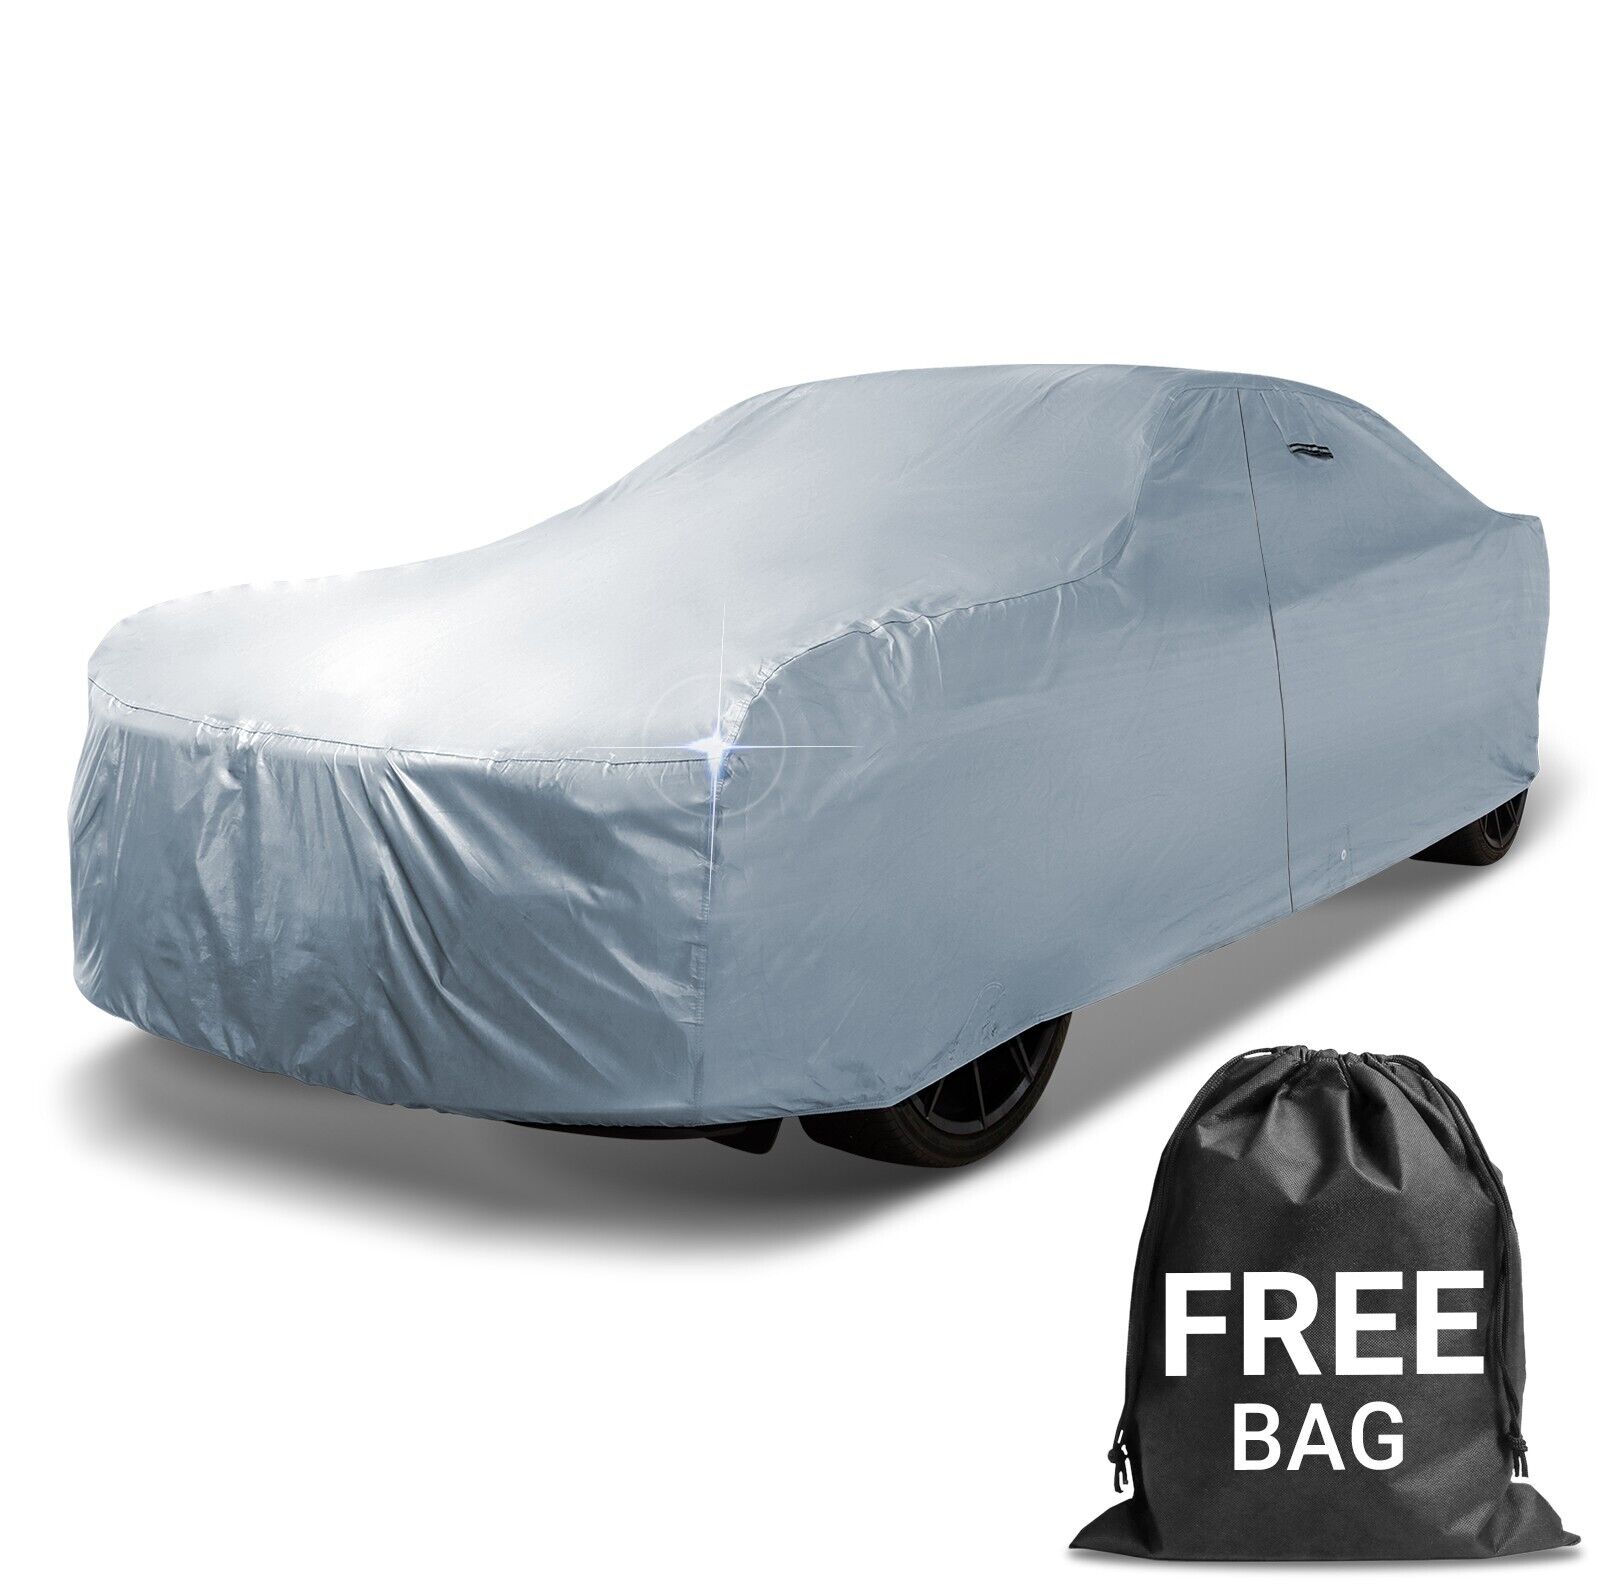 1971-1973 Mercury Cougar Custom Car Cover - All-Weather Waterproof Protection